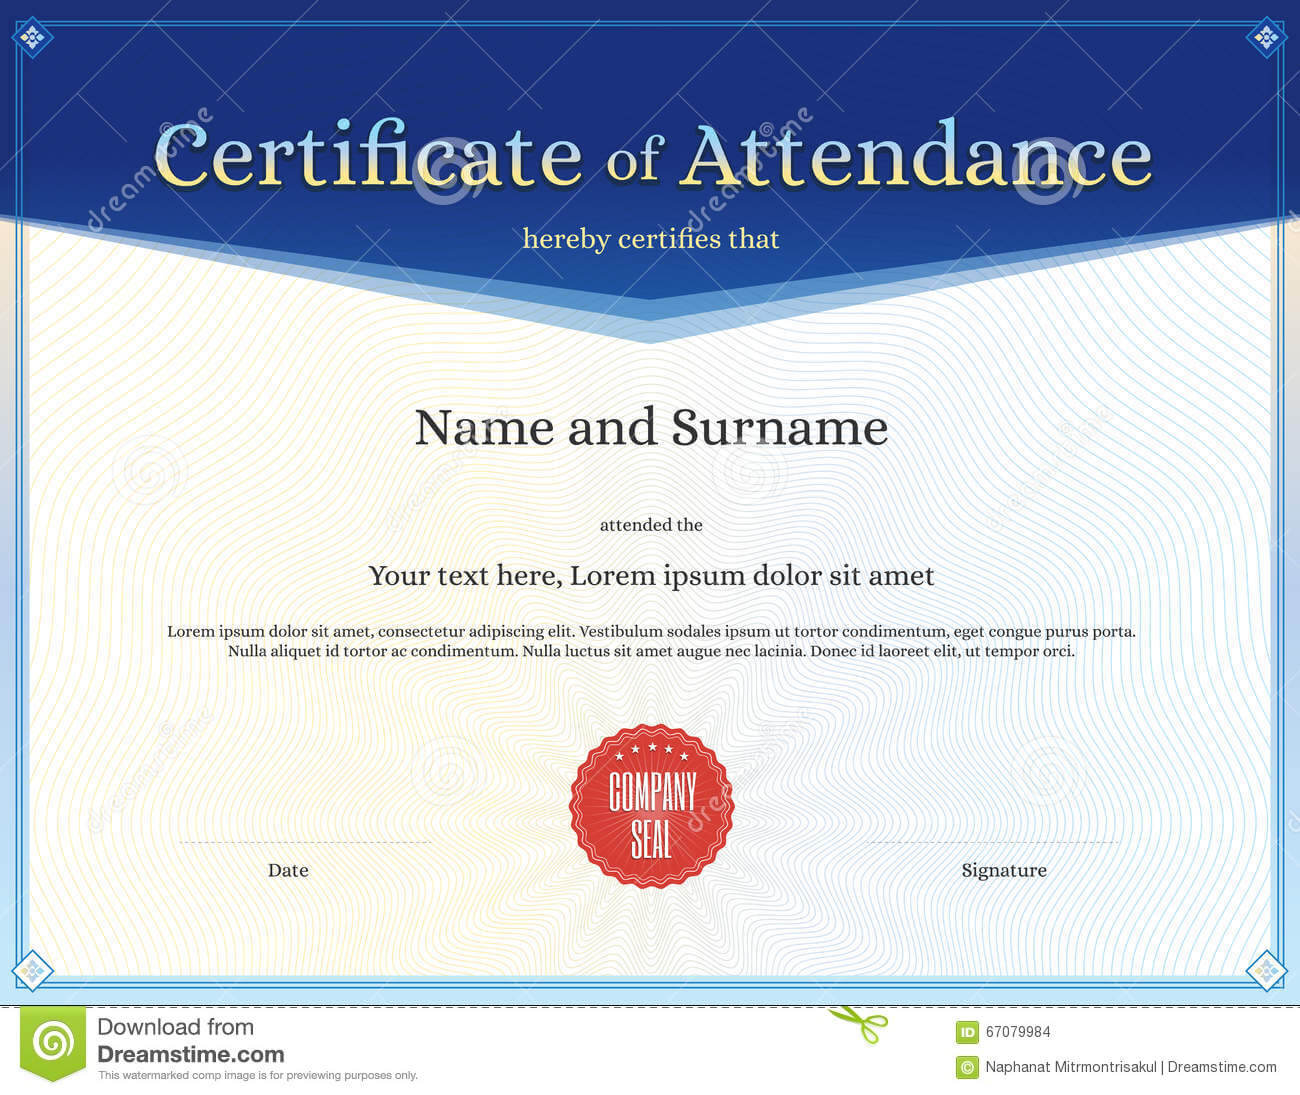 Certificate Of Attendance Template In Vector Stock Vector With Perfect Attendance Certificate Free Template